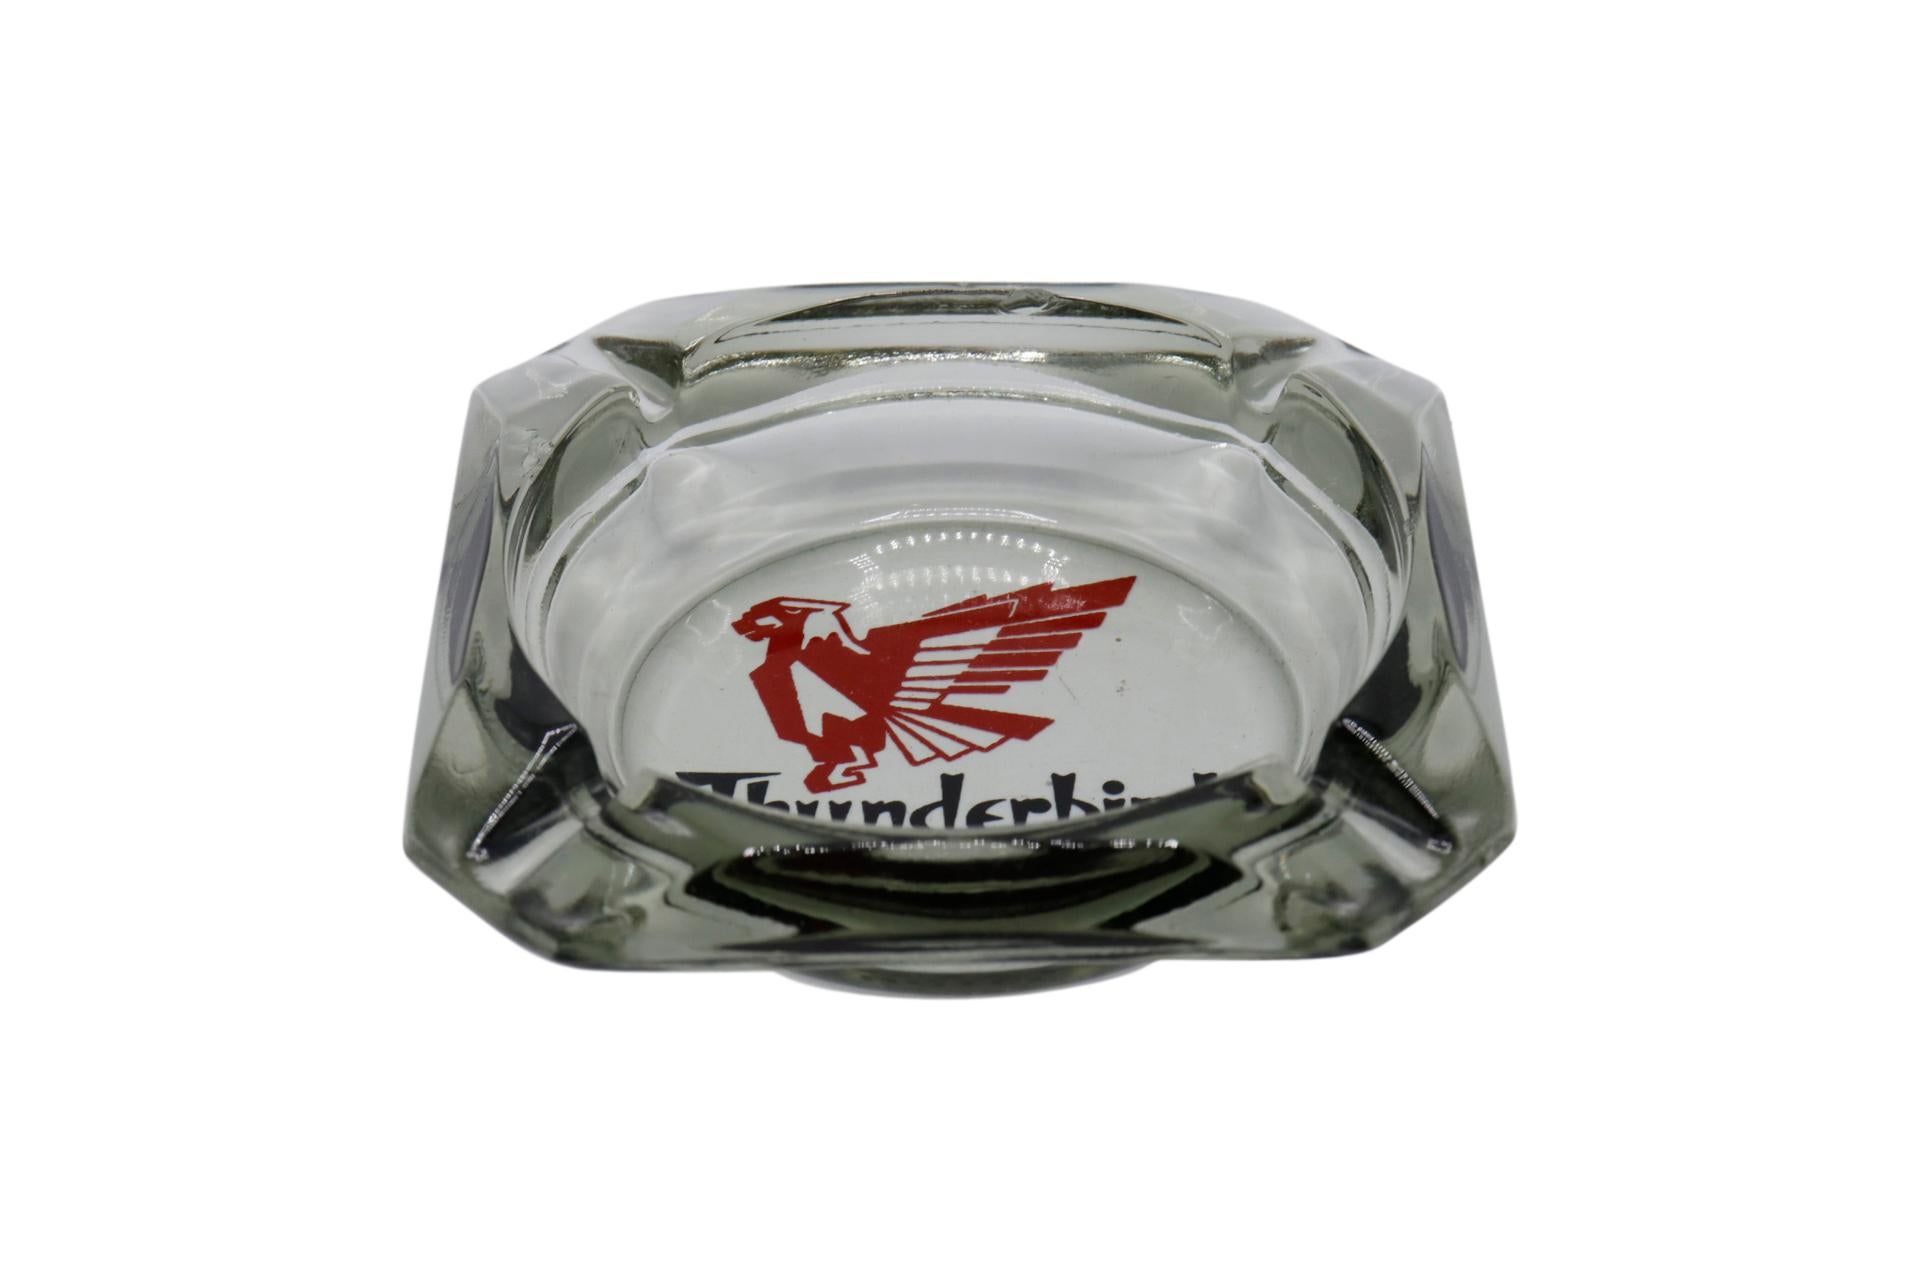 A pair of square glass ashtrays from the Thunderbird Hotel of Las Vegas, Nevada. The center is printed with their 1950's logo and reads “Thunderbird Hotel, Las Vegas, Nev”. The Thunderbird hosted a number of noted entertainers and production shows